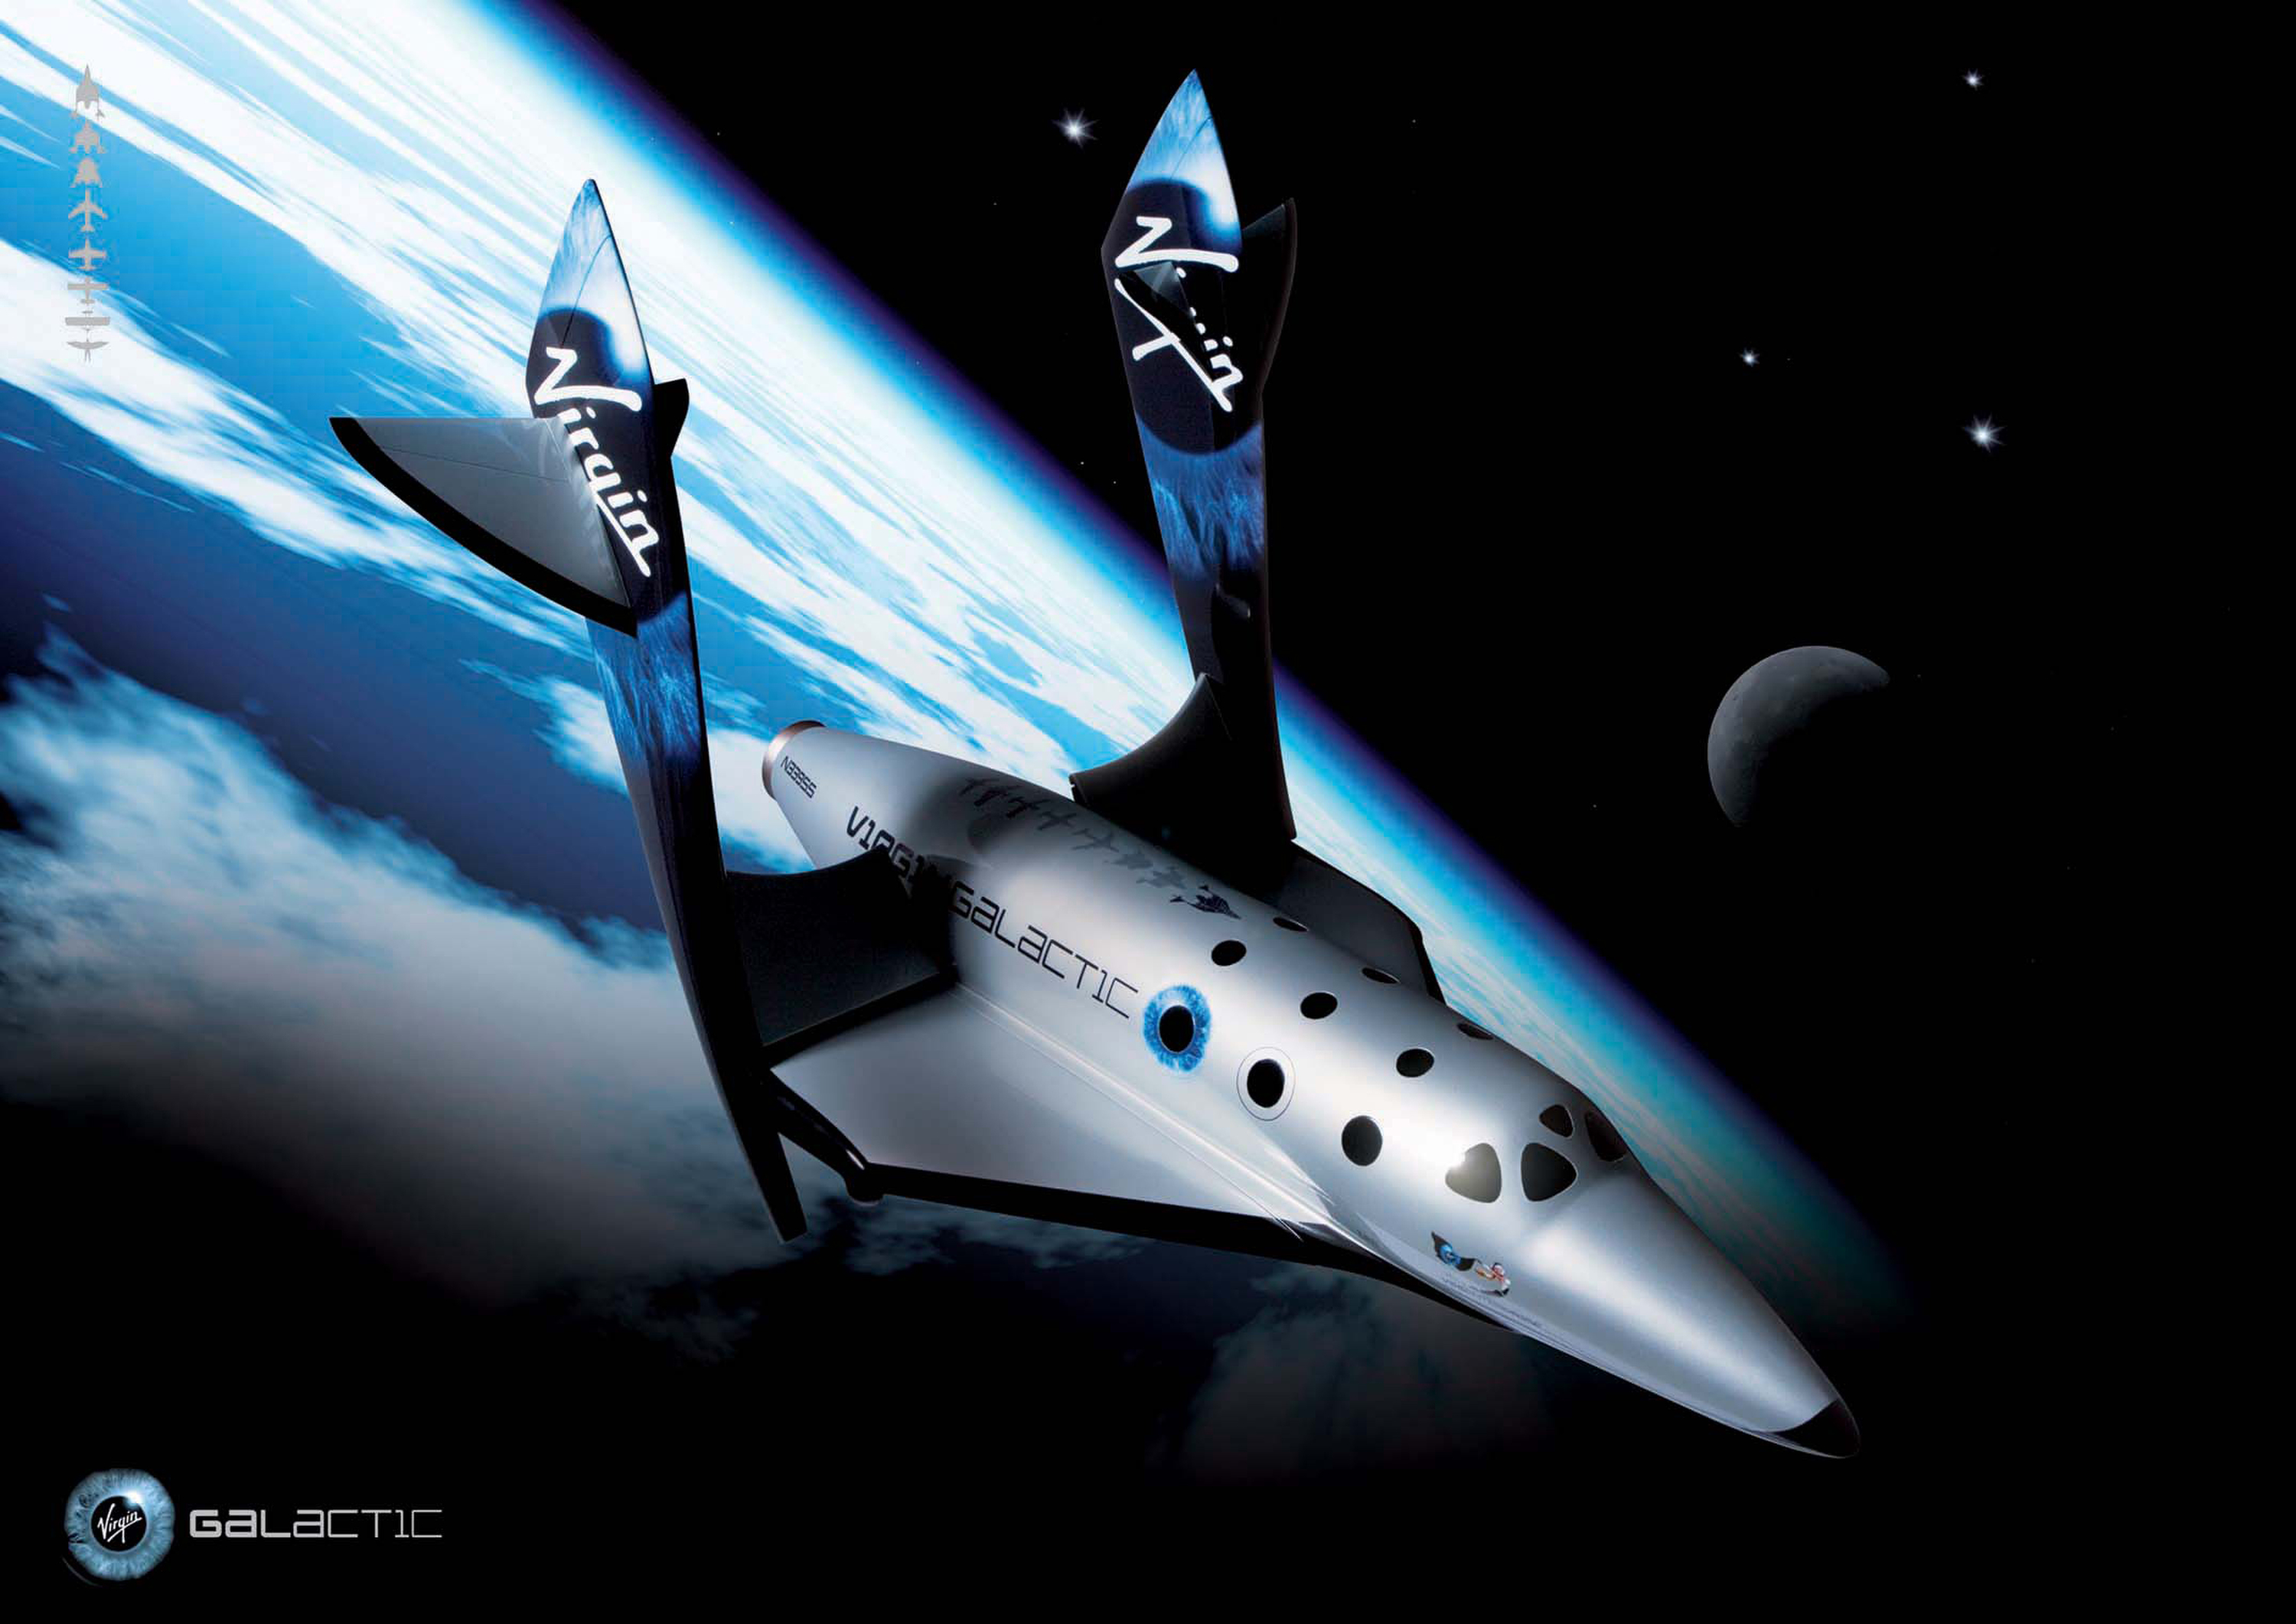 space tourism in 2010